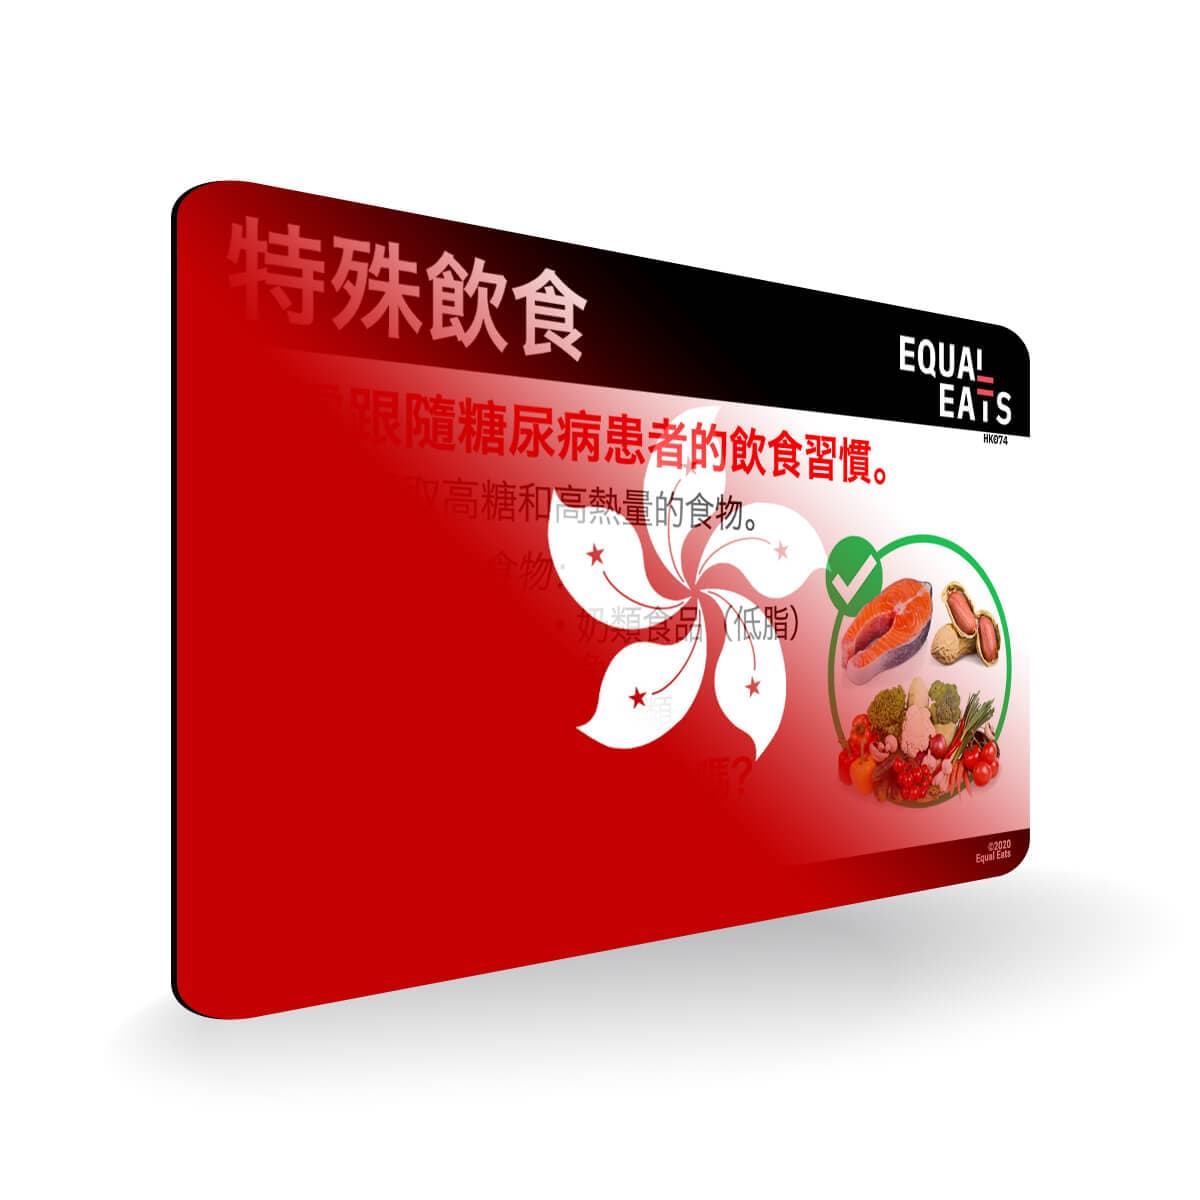 Diabetic Diet in Traditional Chinese. Diabetes Card for Hong Kong Travel